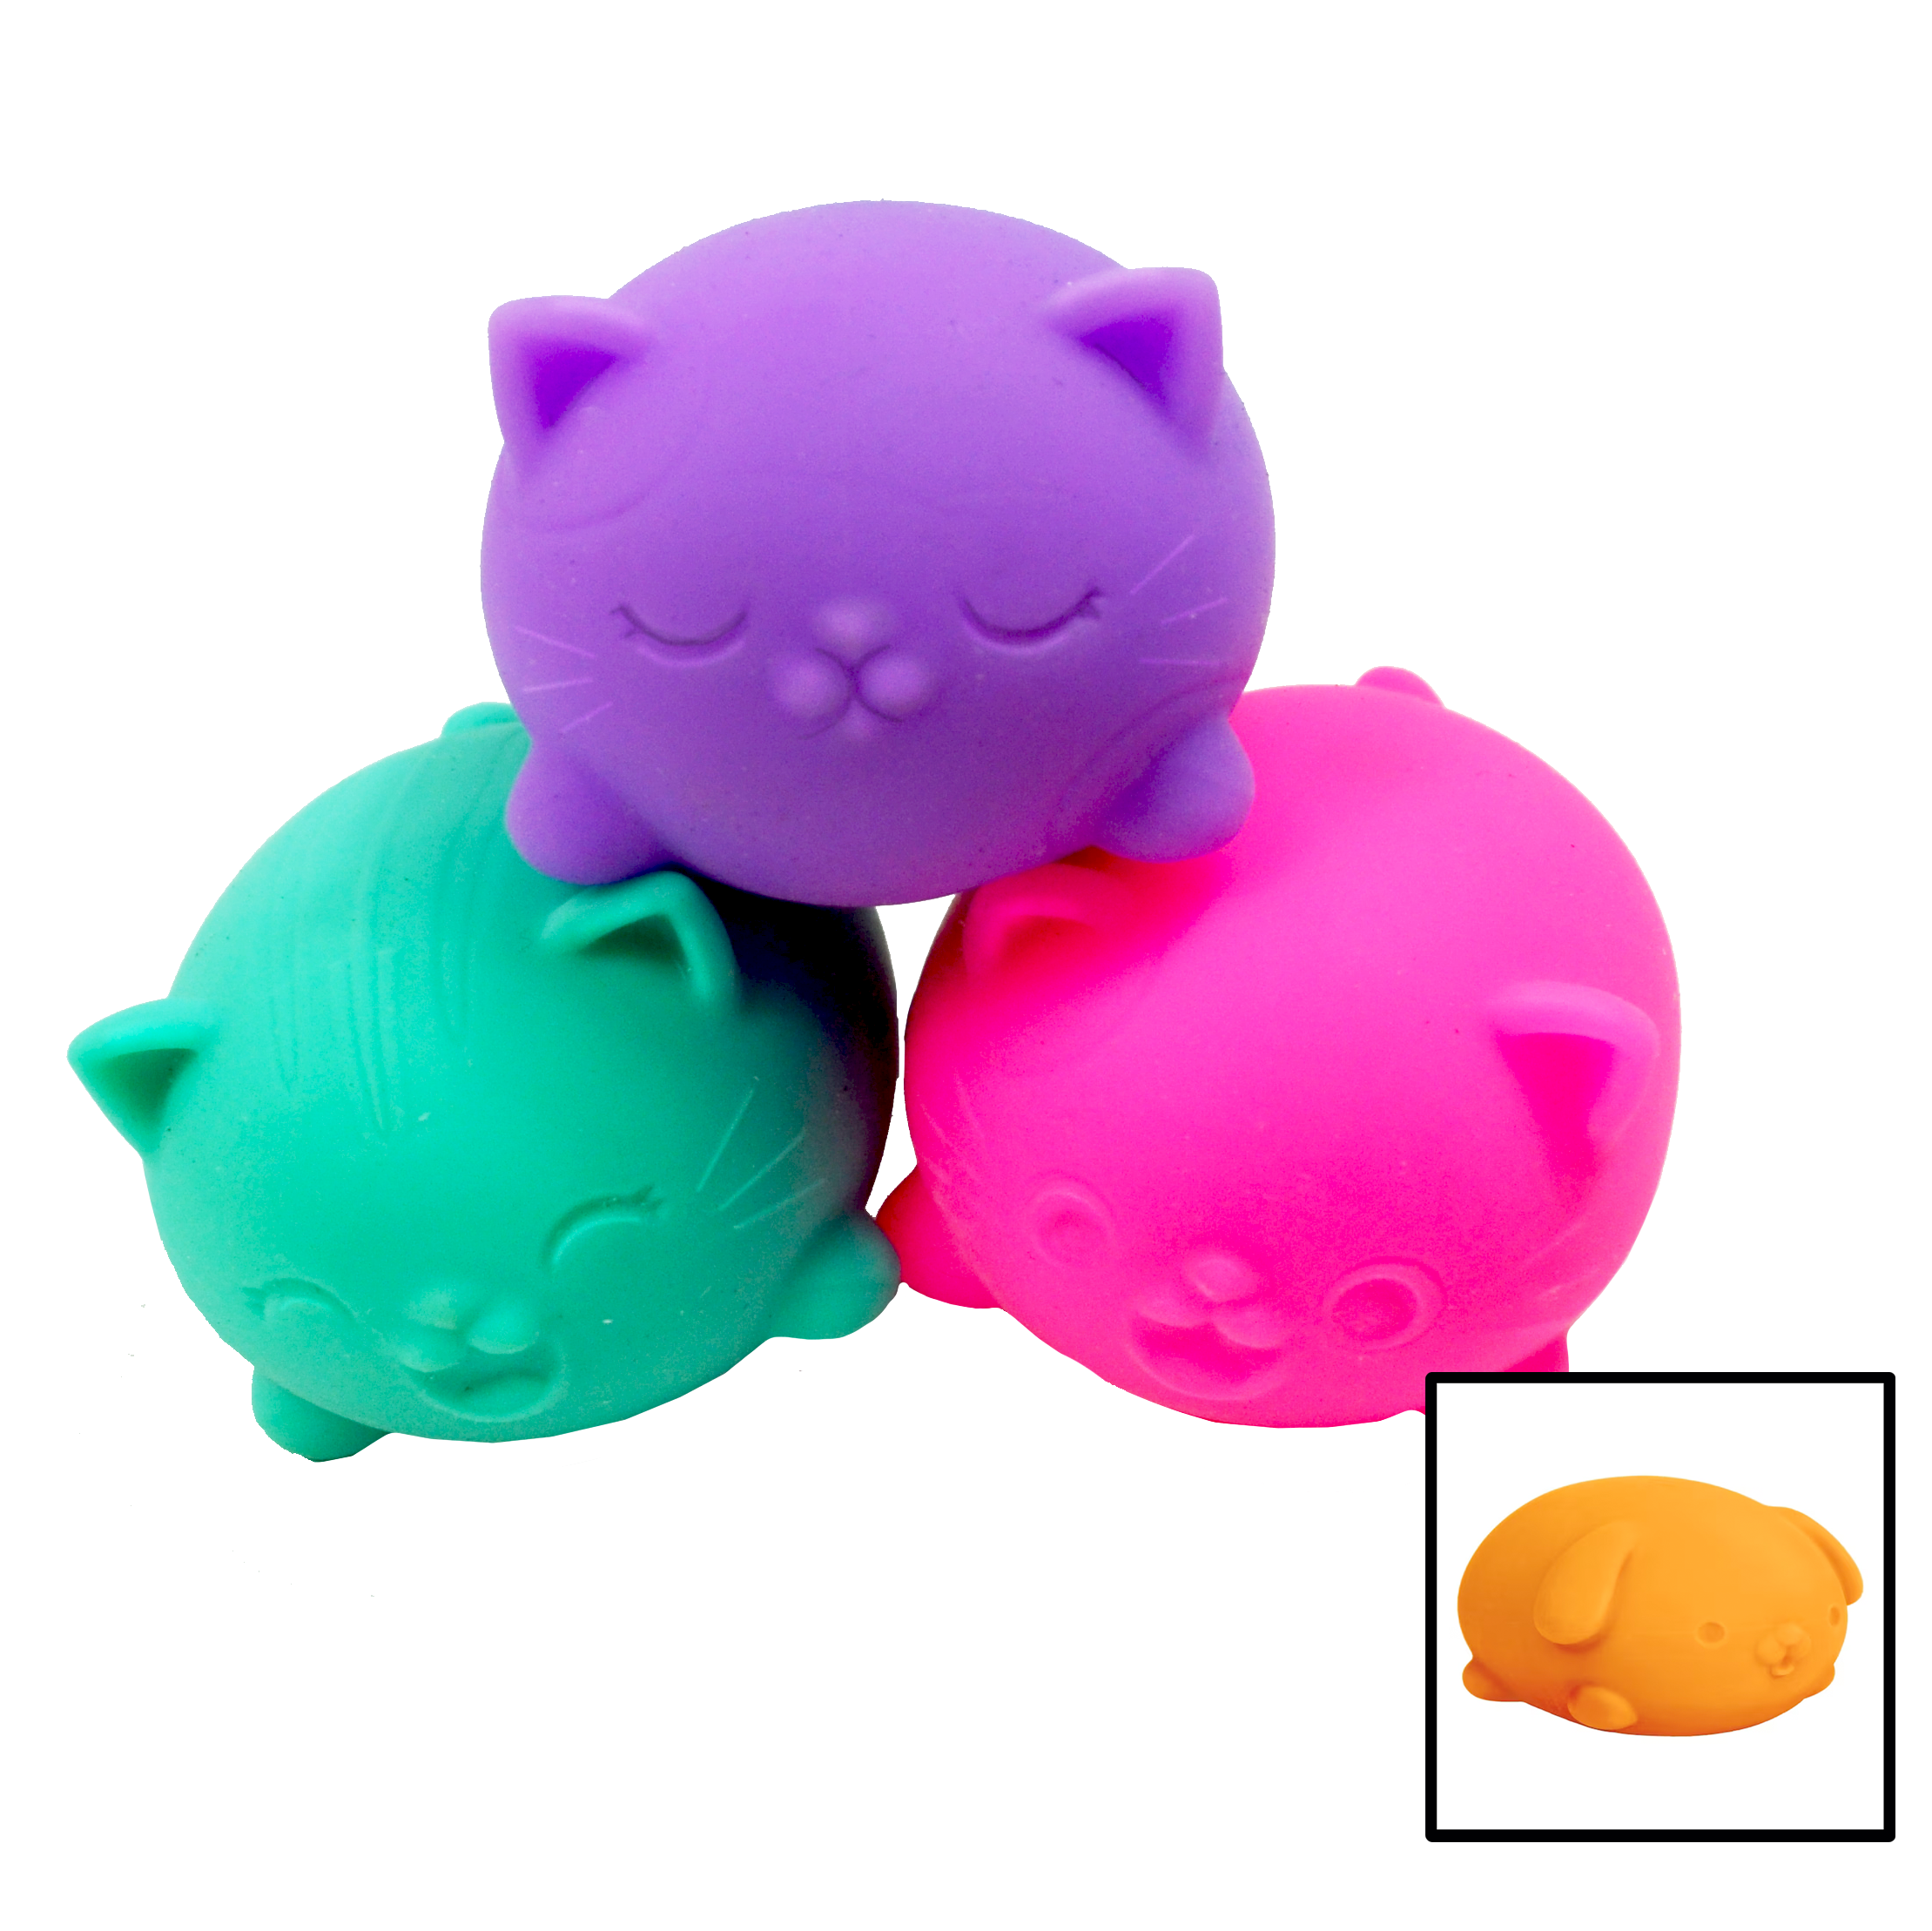 Swirly Gel Squeeze Ball, 450+ Favorites Under $10, Swirly Gel Squeeze Ball  from Therapy Shoppe Swirly Gel Squeeze Ball, Silent Classroom Fidget  Toy-Tool, Stress Ball, Anxiety Relief